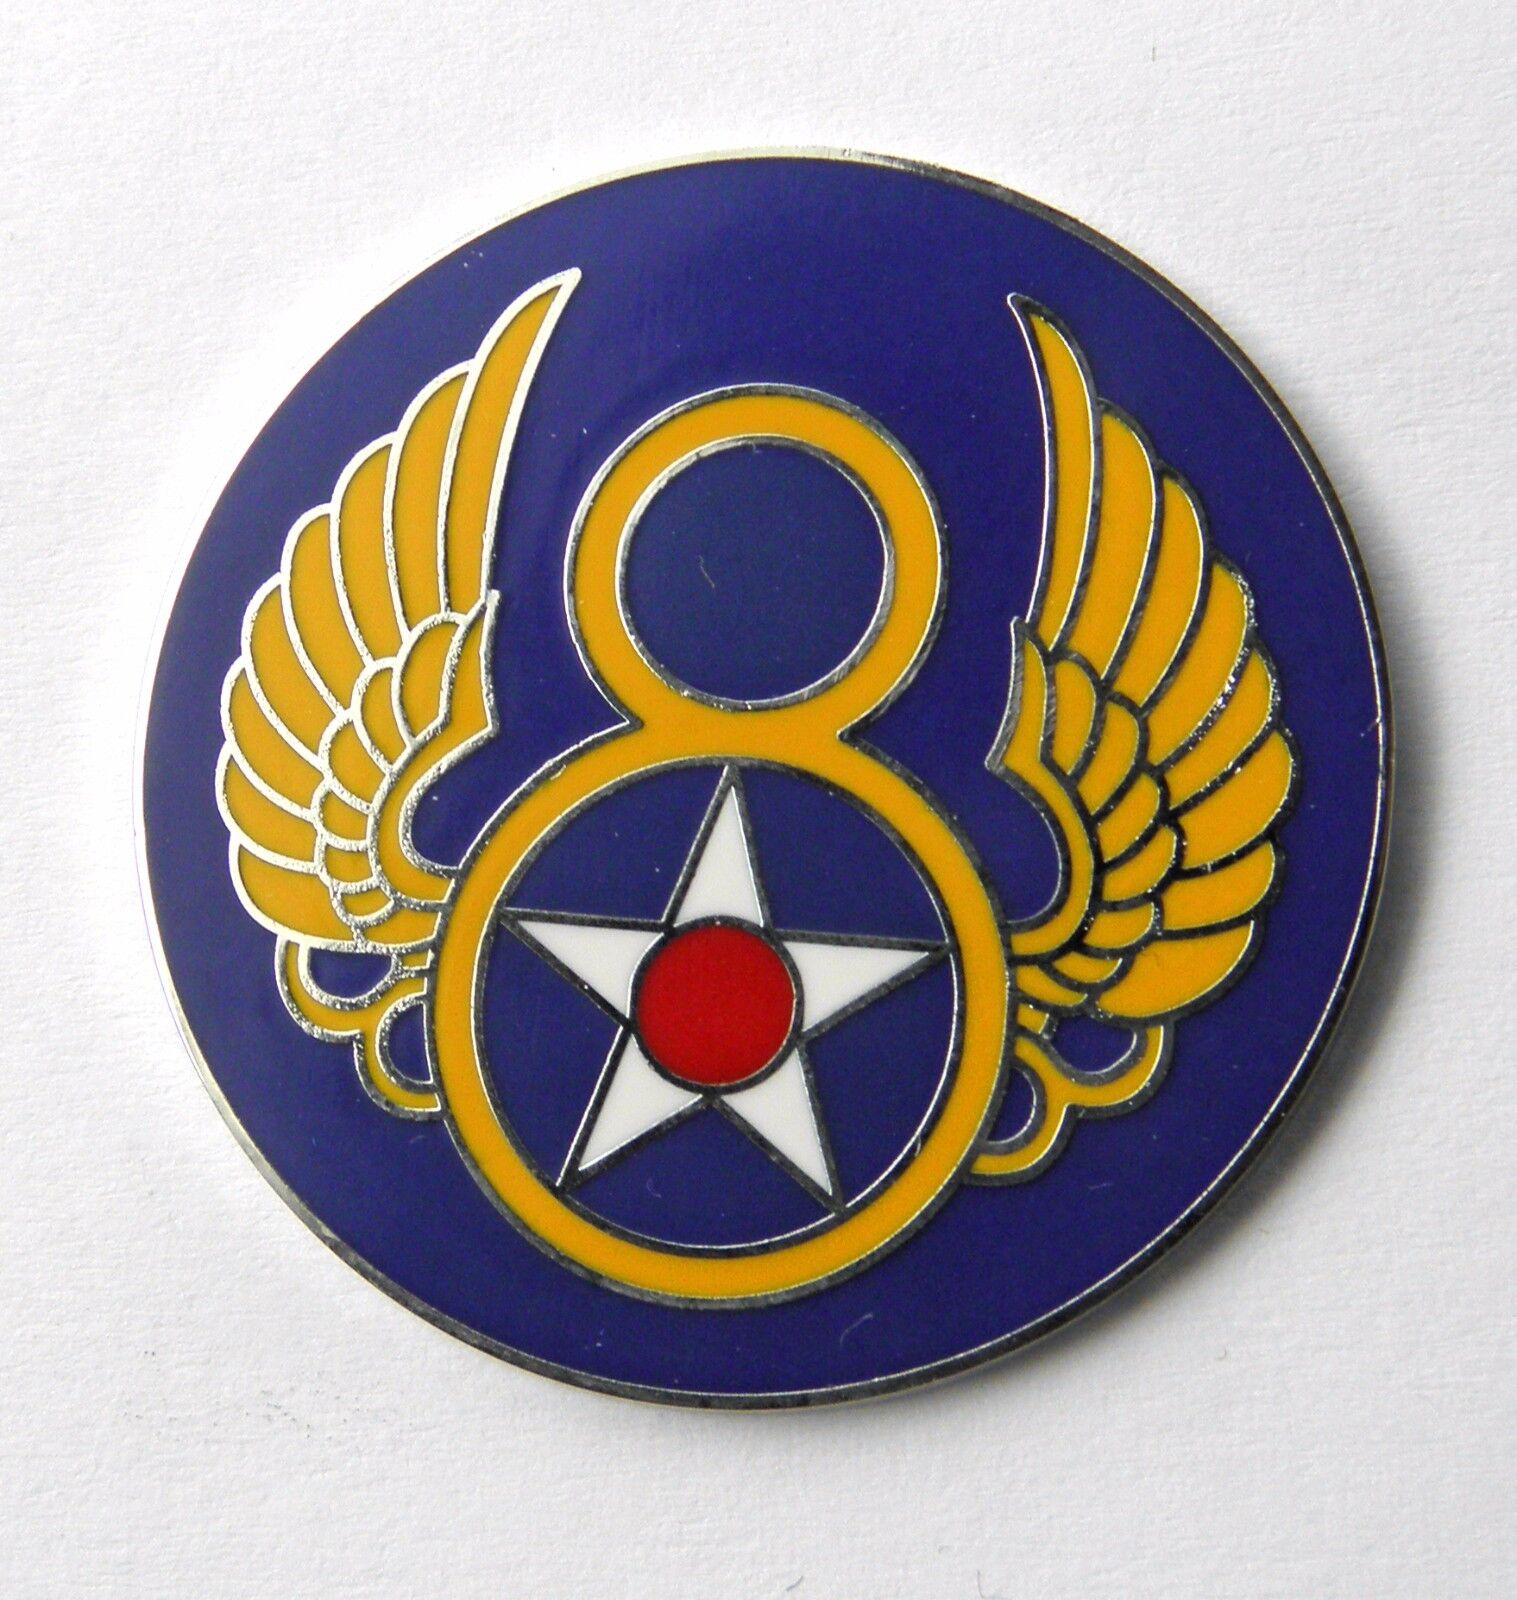 USAF UNITED STATES 8TH AIR FORCE LARGE PIN BADGE 1.5 INCHES US